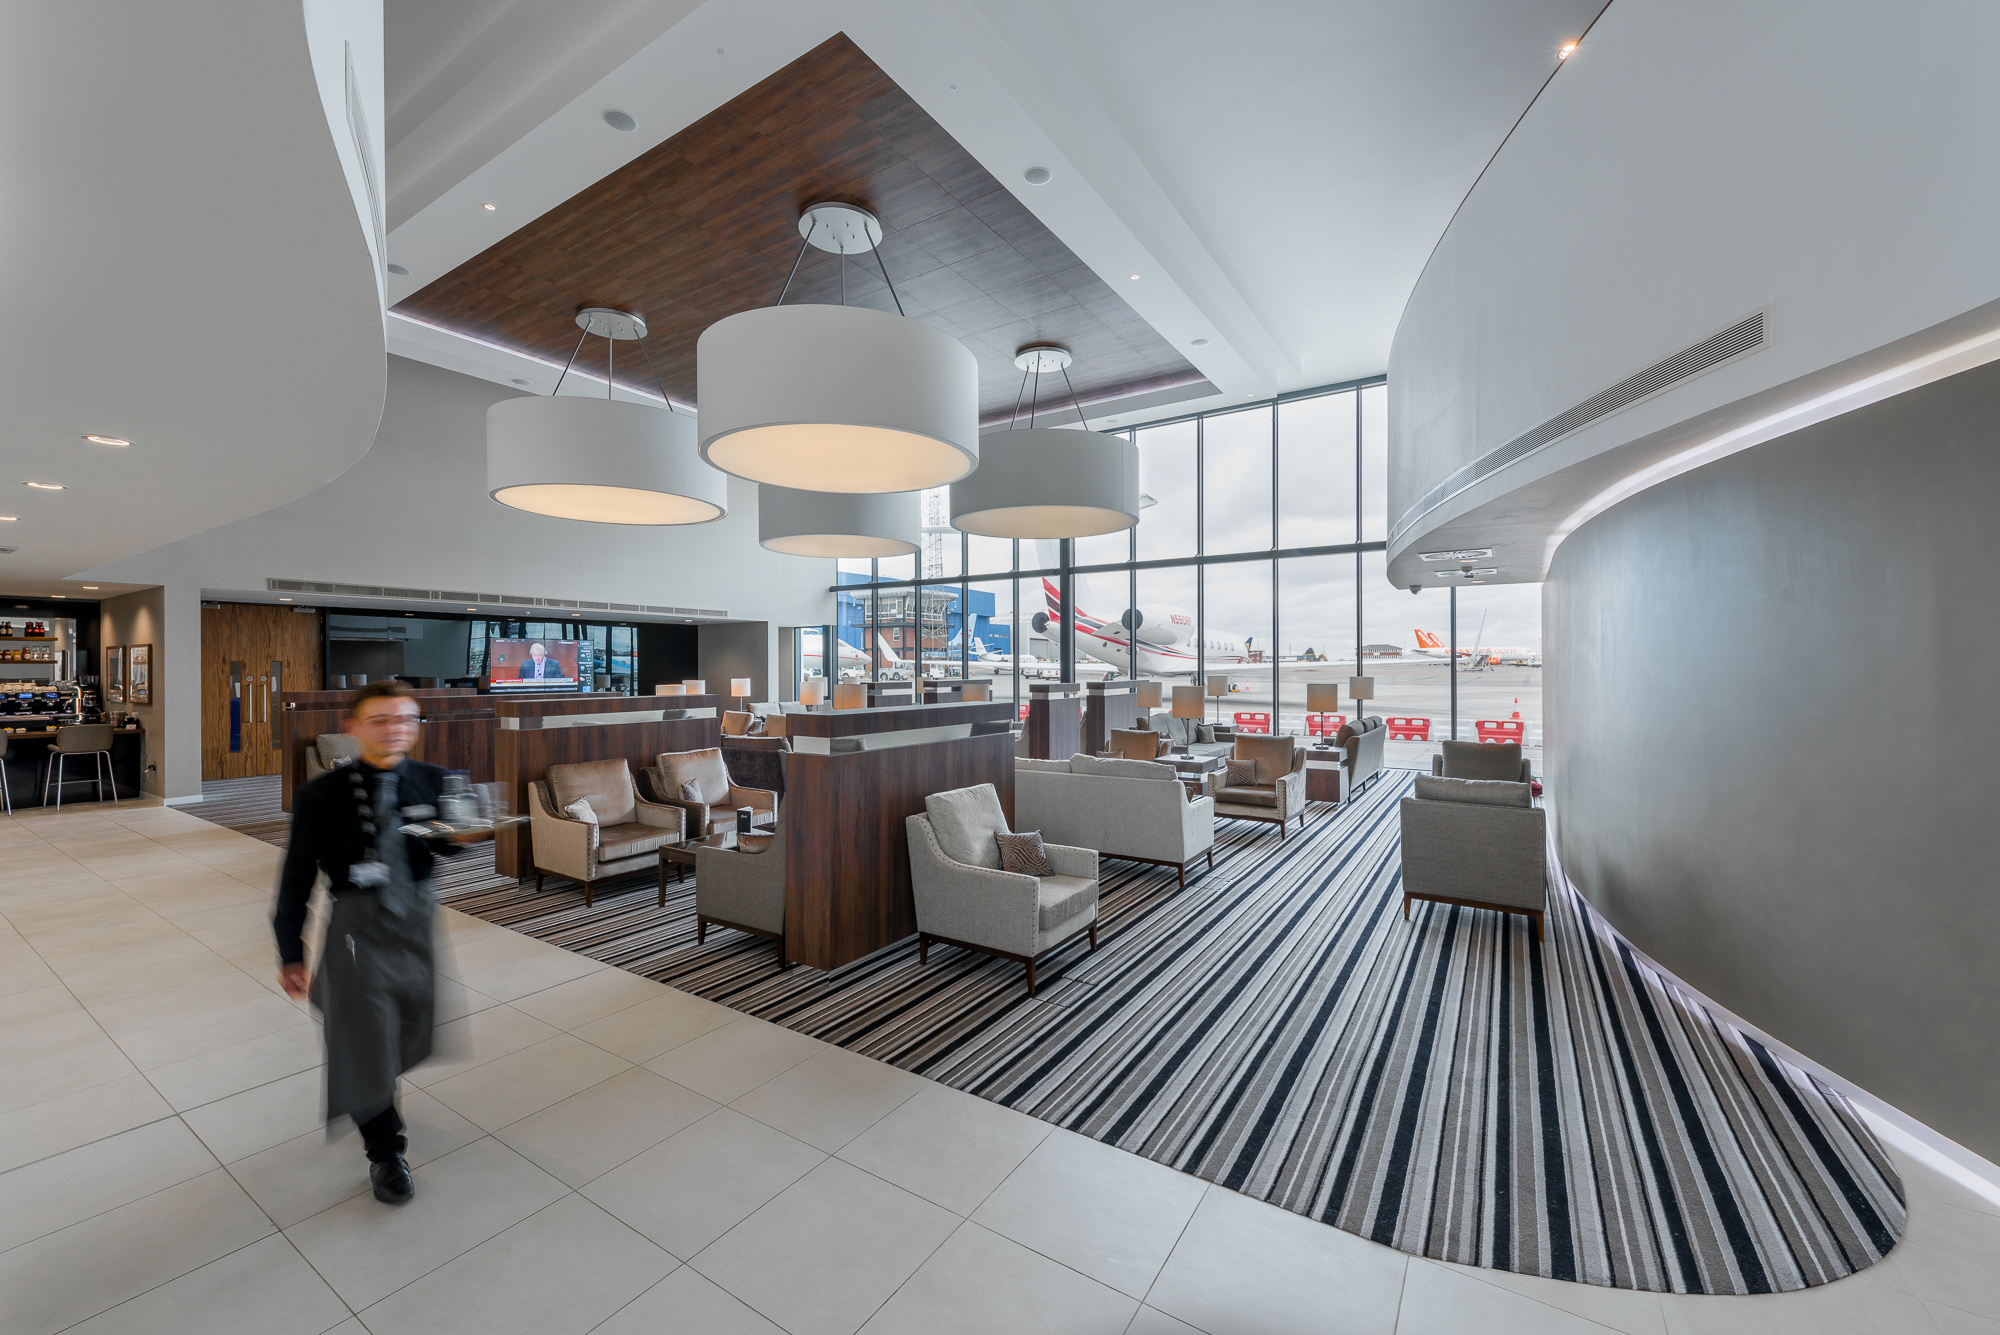 Commercial-interior-photography-luton-airport-10.jpg